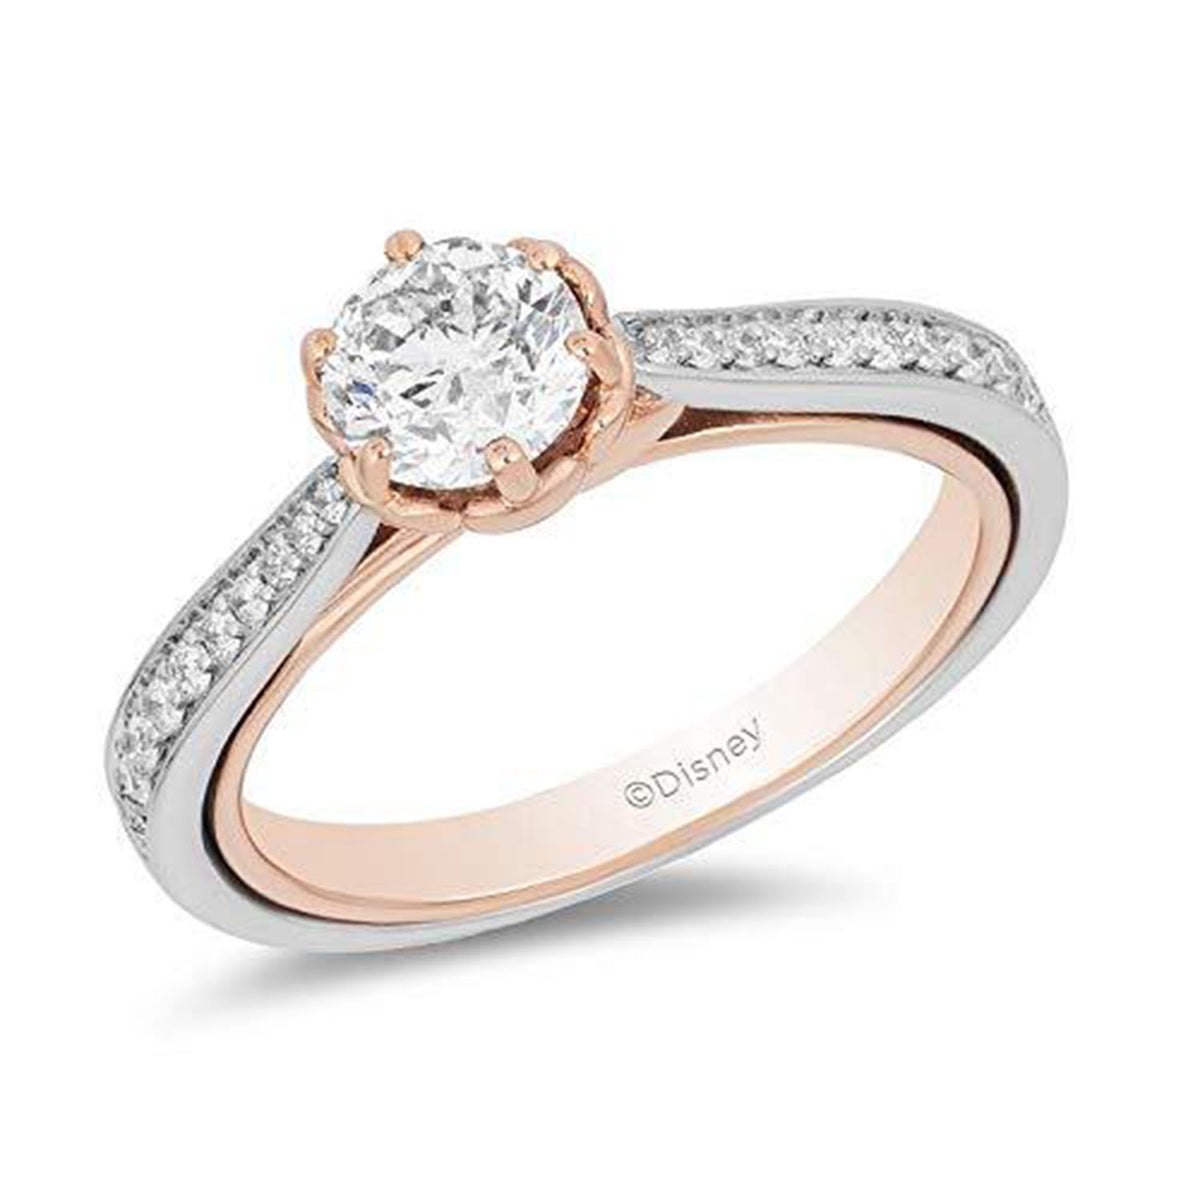 Disney Belle Inspired Diamond Engagement Ring in 14K White Gold & Rose Gold  7/8 CTTW | Enchanted Disney Fine Jewelry